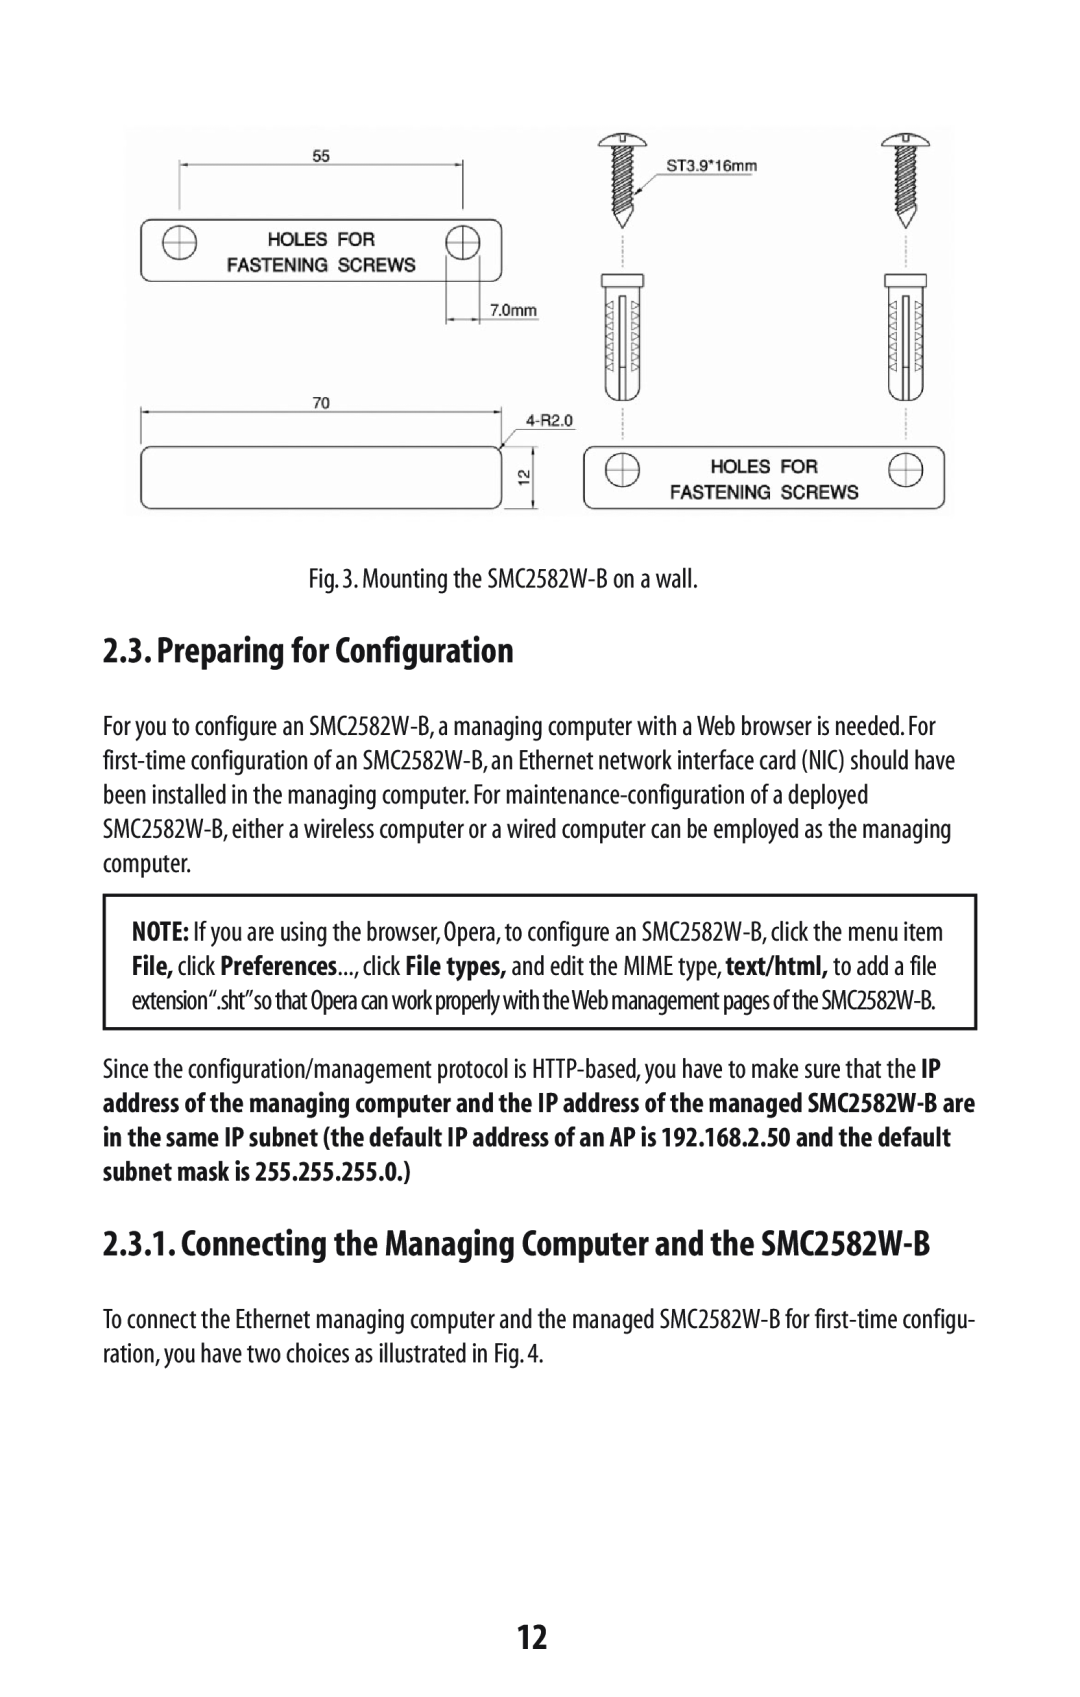 SMC Networks manual Preparing for Configuration, Connecting the Managing Computer and the SMC2582W-B 